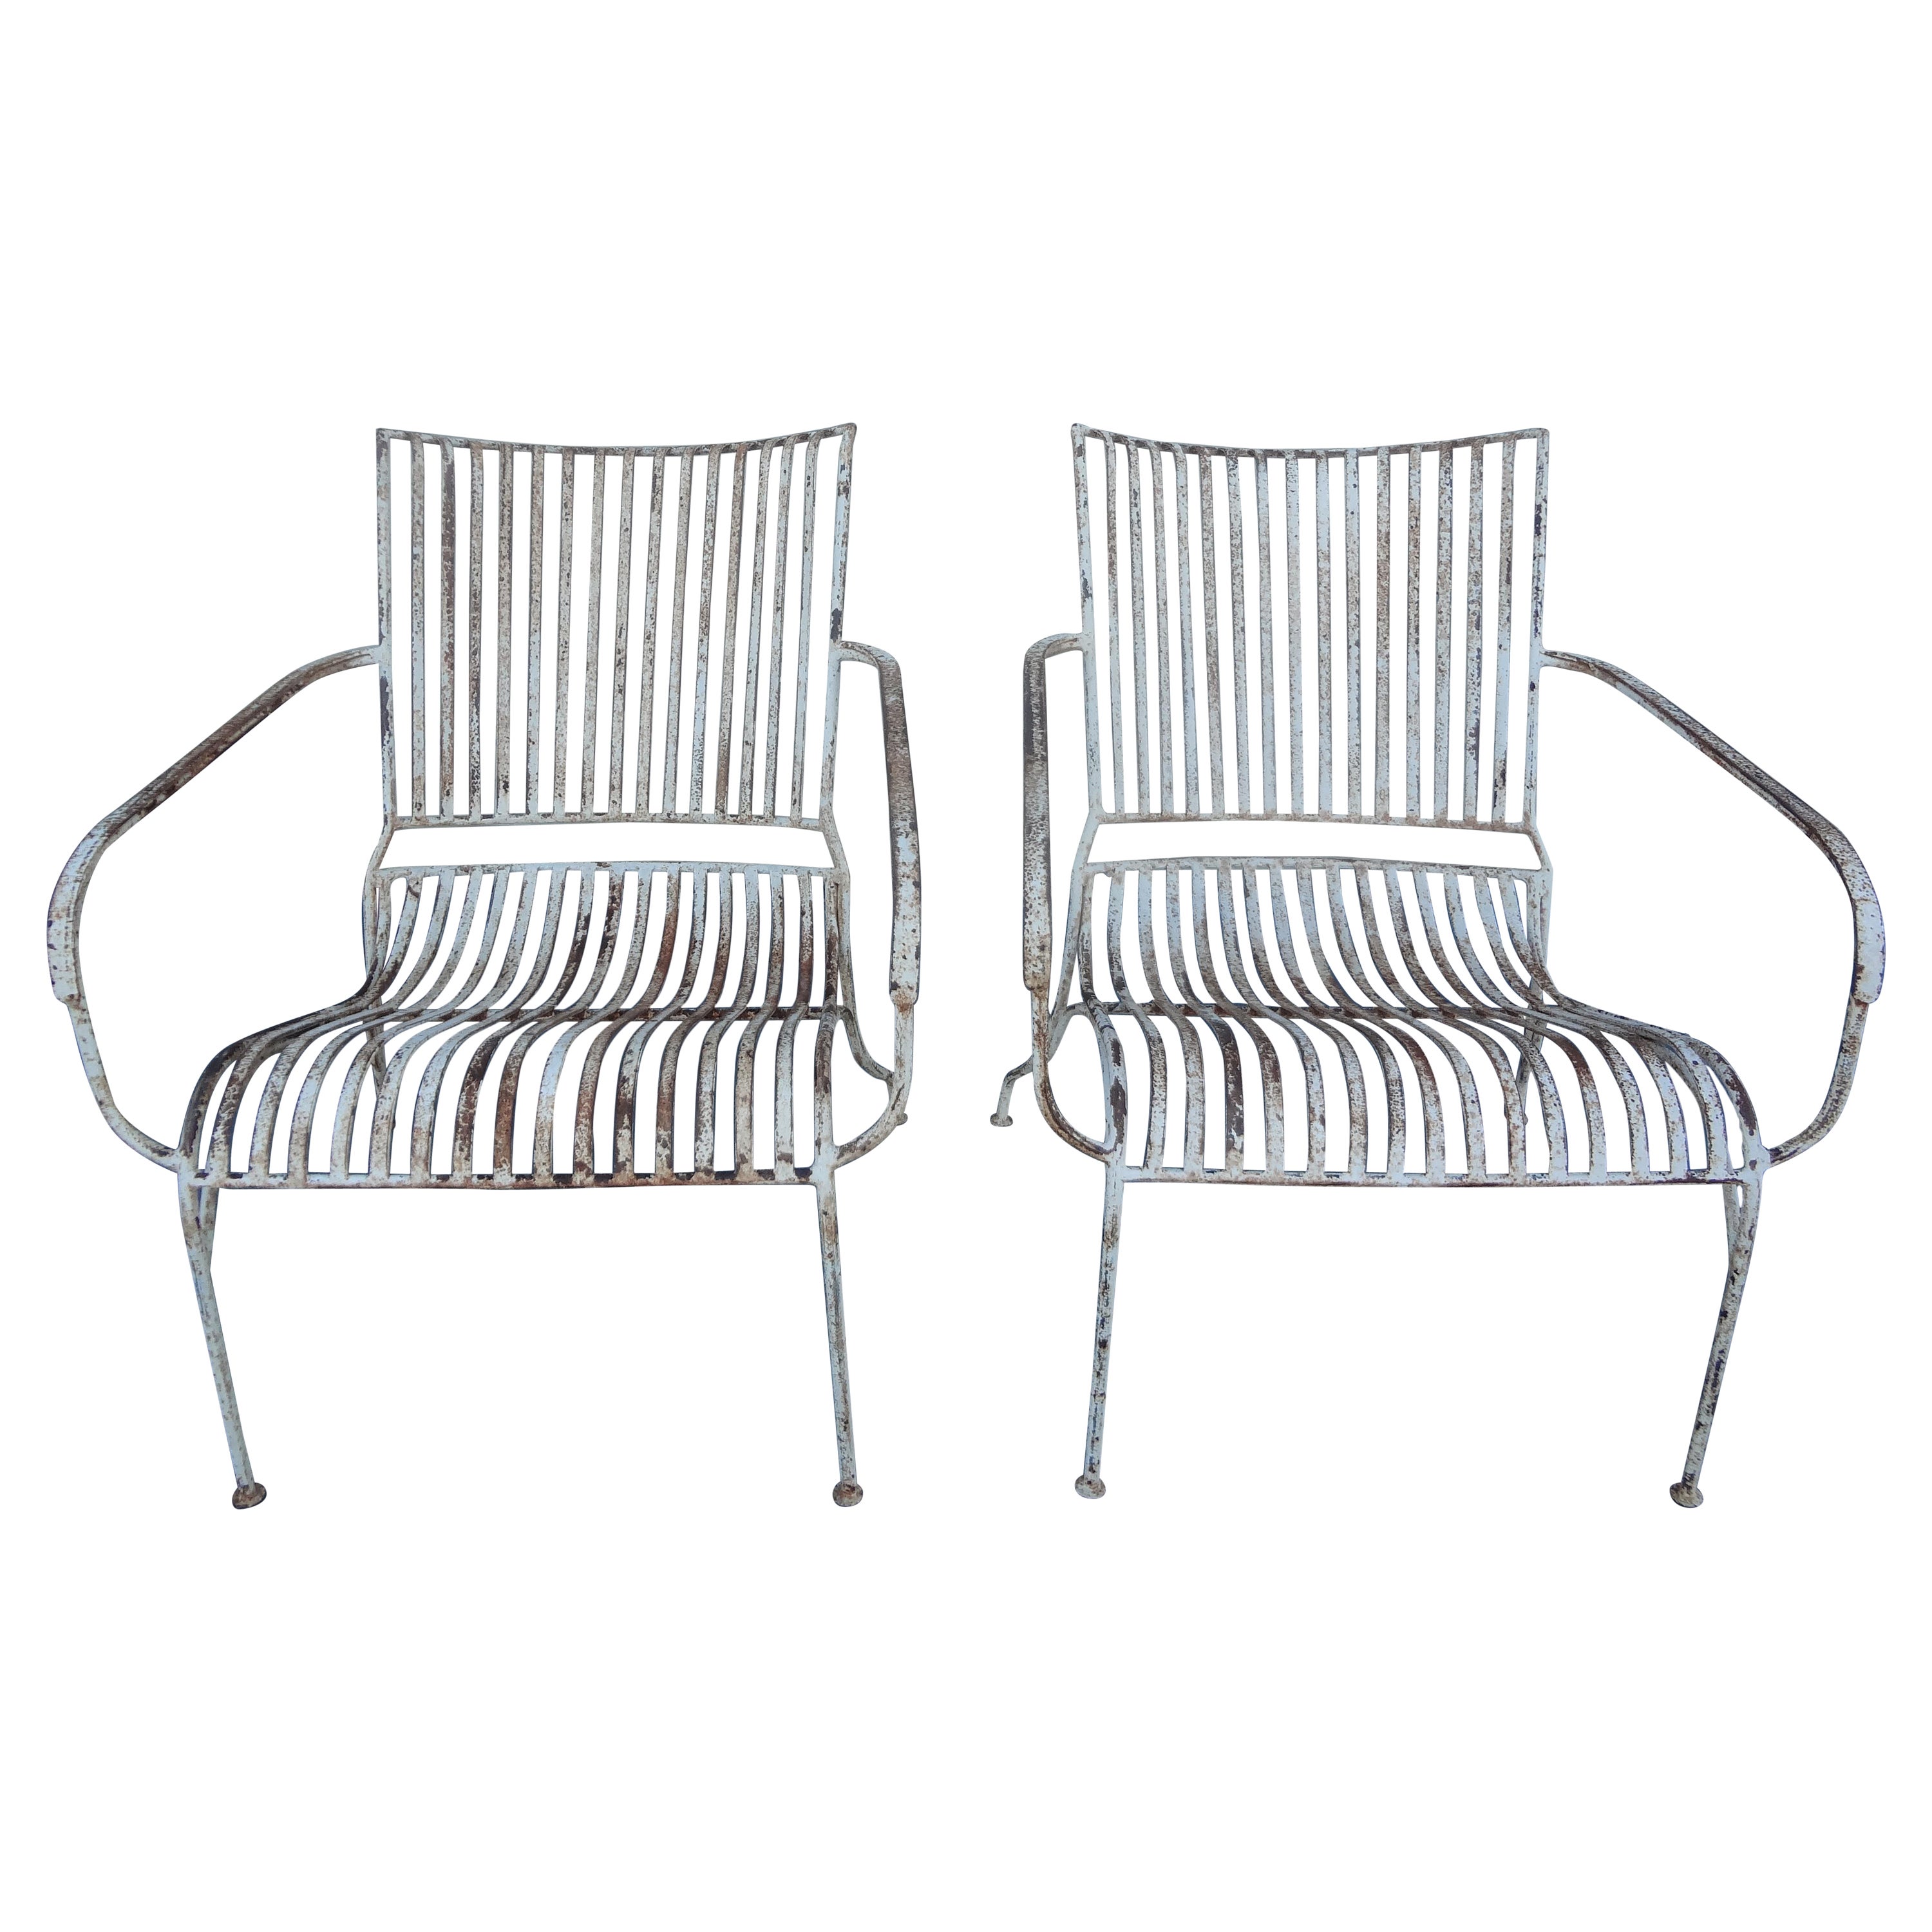 Pair Of French Wrought Iron Garden Chairs For Sale